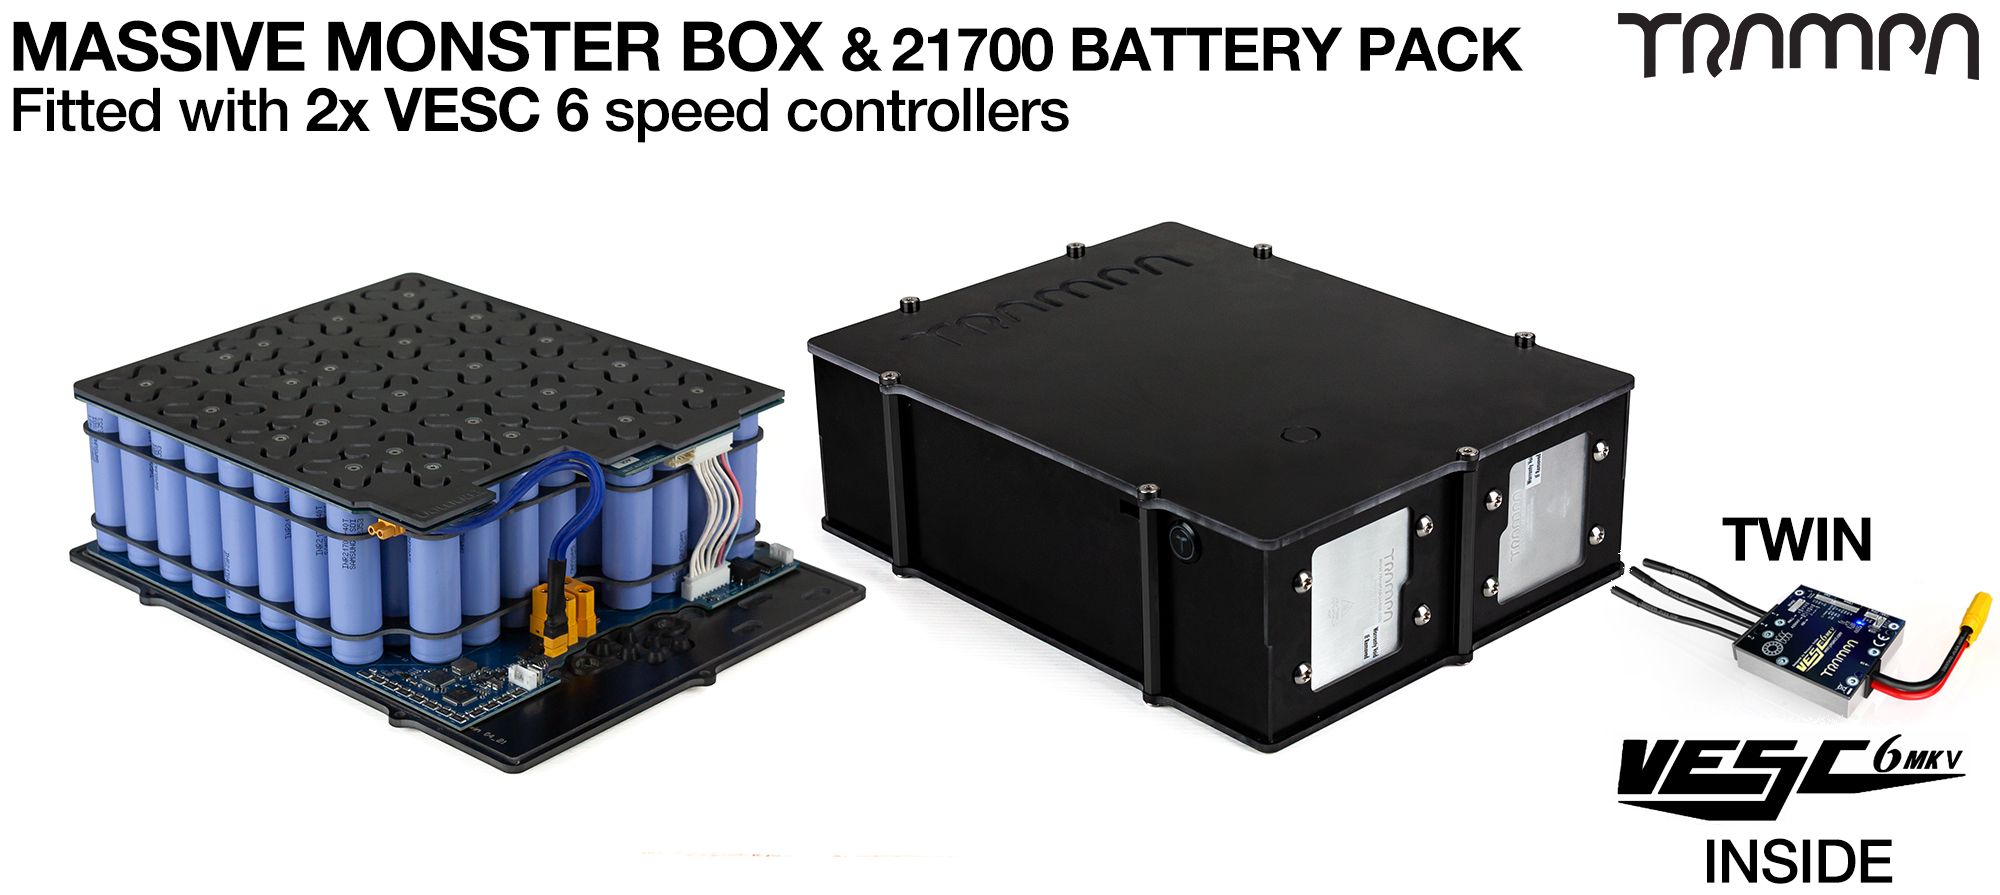 21700 MASSIVE MONSTER Box with 21700 PCB Pack with 2x VESC 6 & 84x 21700 cells 12s7p = 35Ah - Specifically made to work in conjunction with TRAMPA's Electric Decks but can be adapted to fit anything - UK Customers only